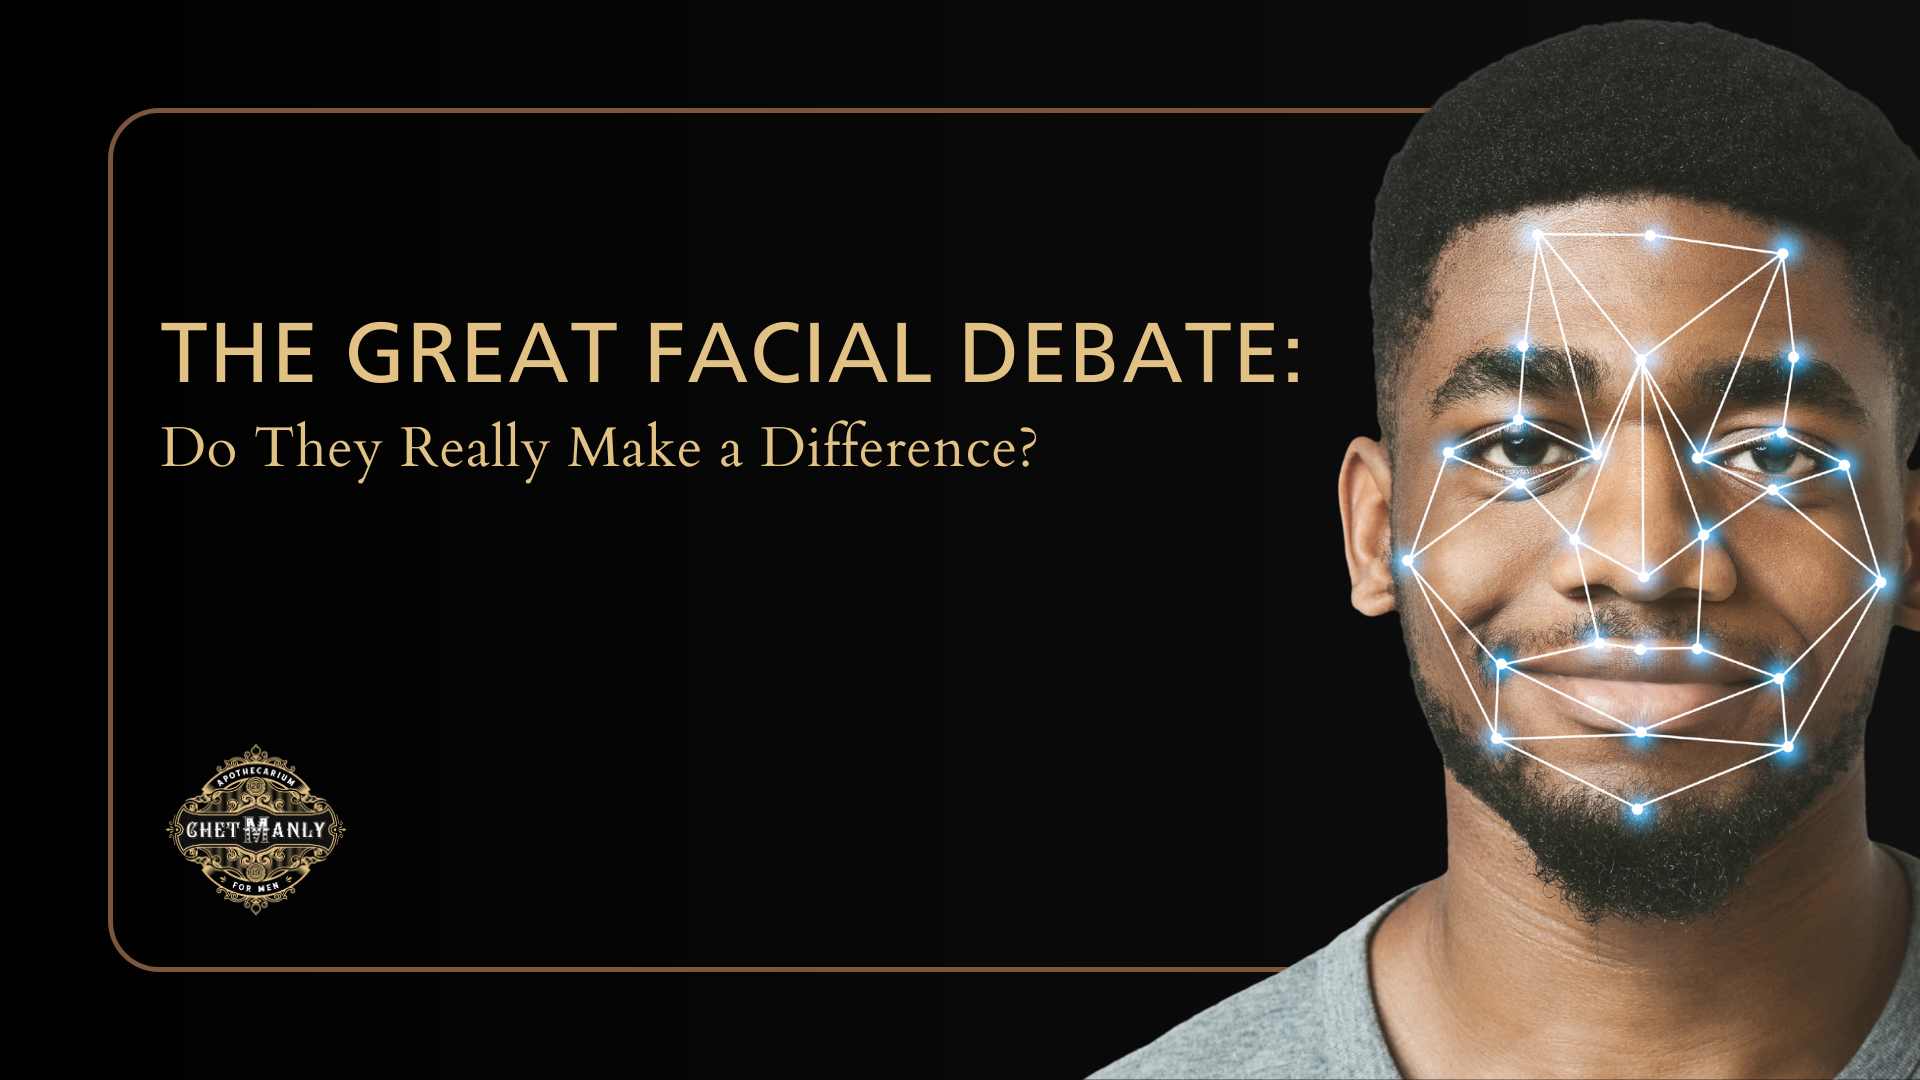 The Great Facial Debate: Do They Really Make a Difference?